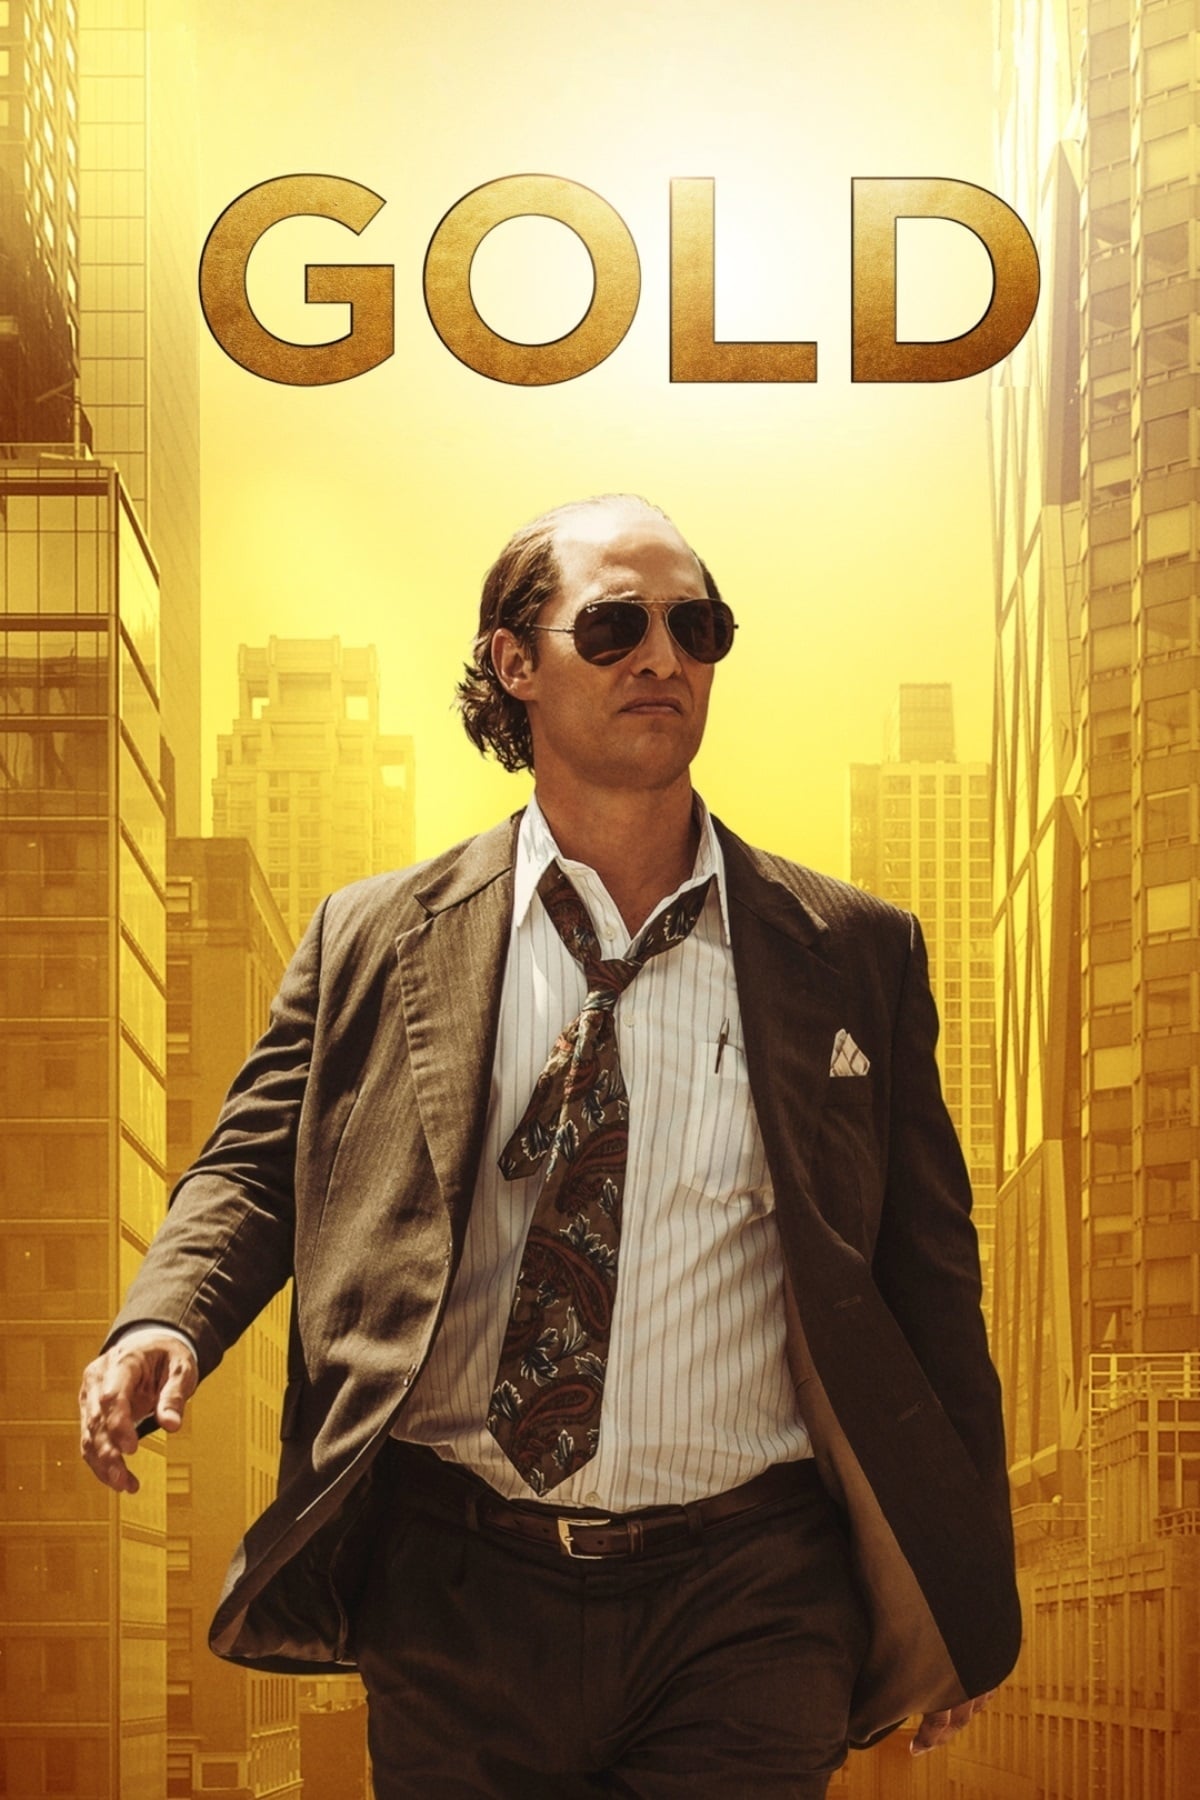 Poster for the movie "Gold"